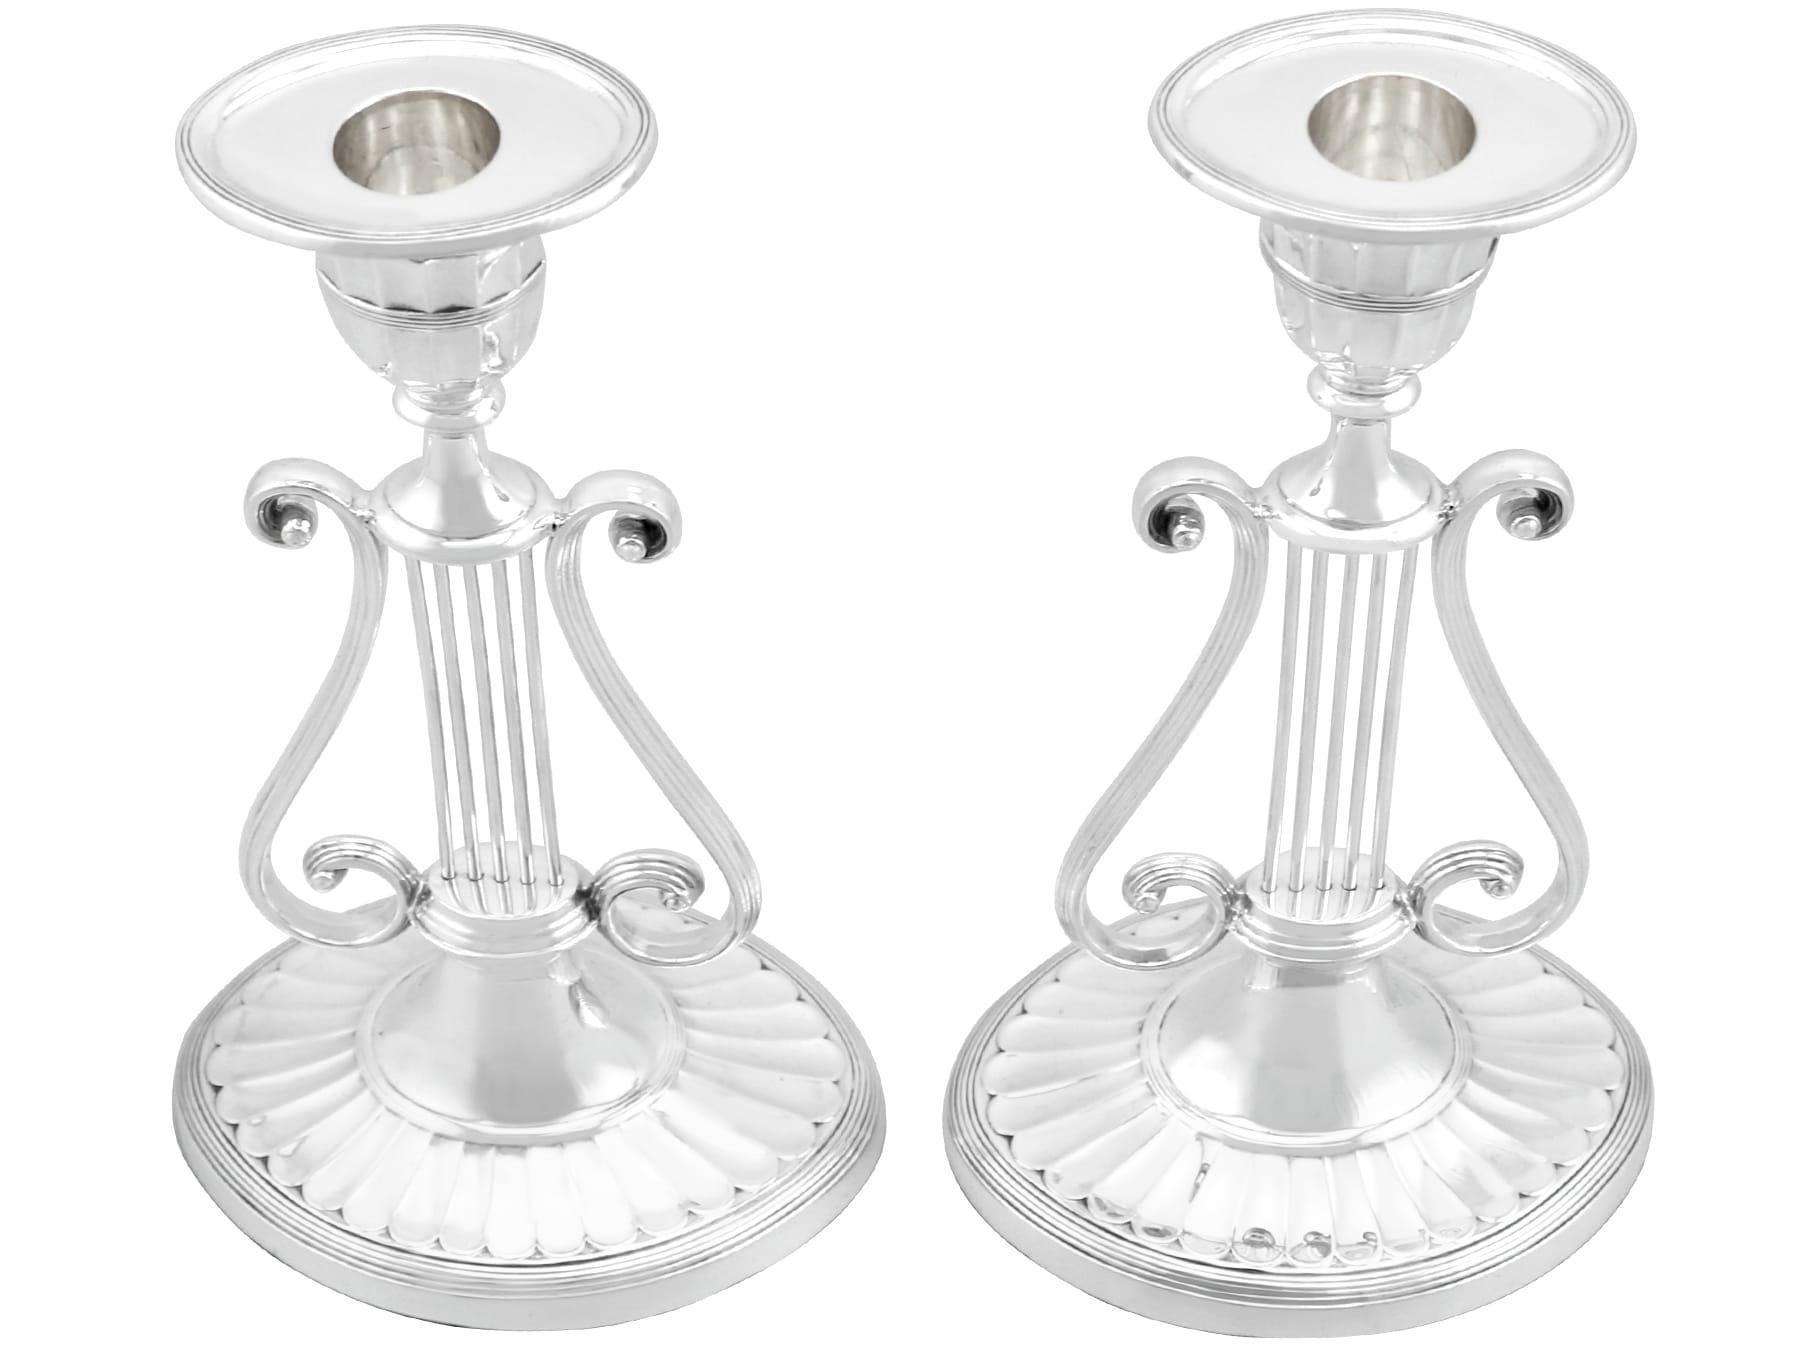 An exceptional, fine and impressive pair of antique Victorian English sterling silver lyre candlesticks; an addition of our ornamental silverware collection

These exceptional antique Victorian English sterling silver candlesticks have been